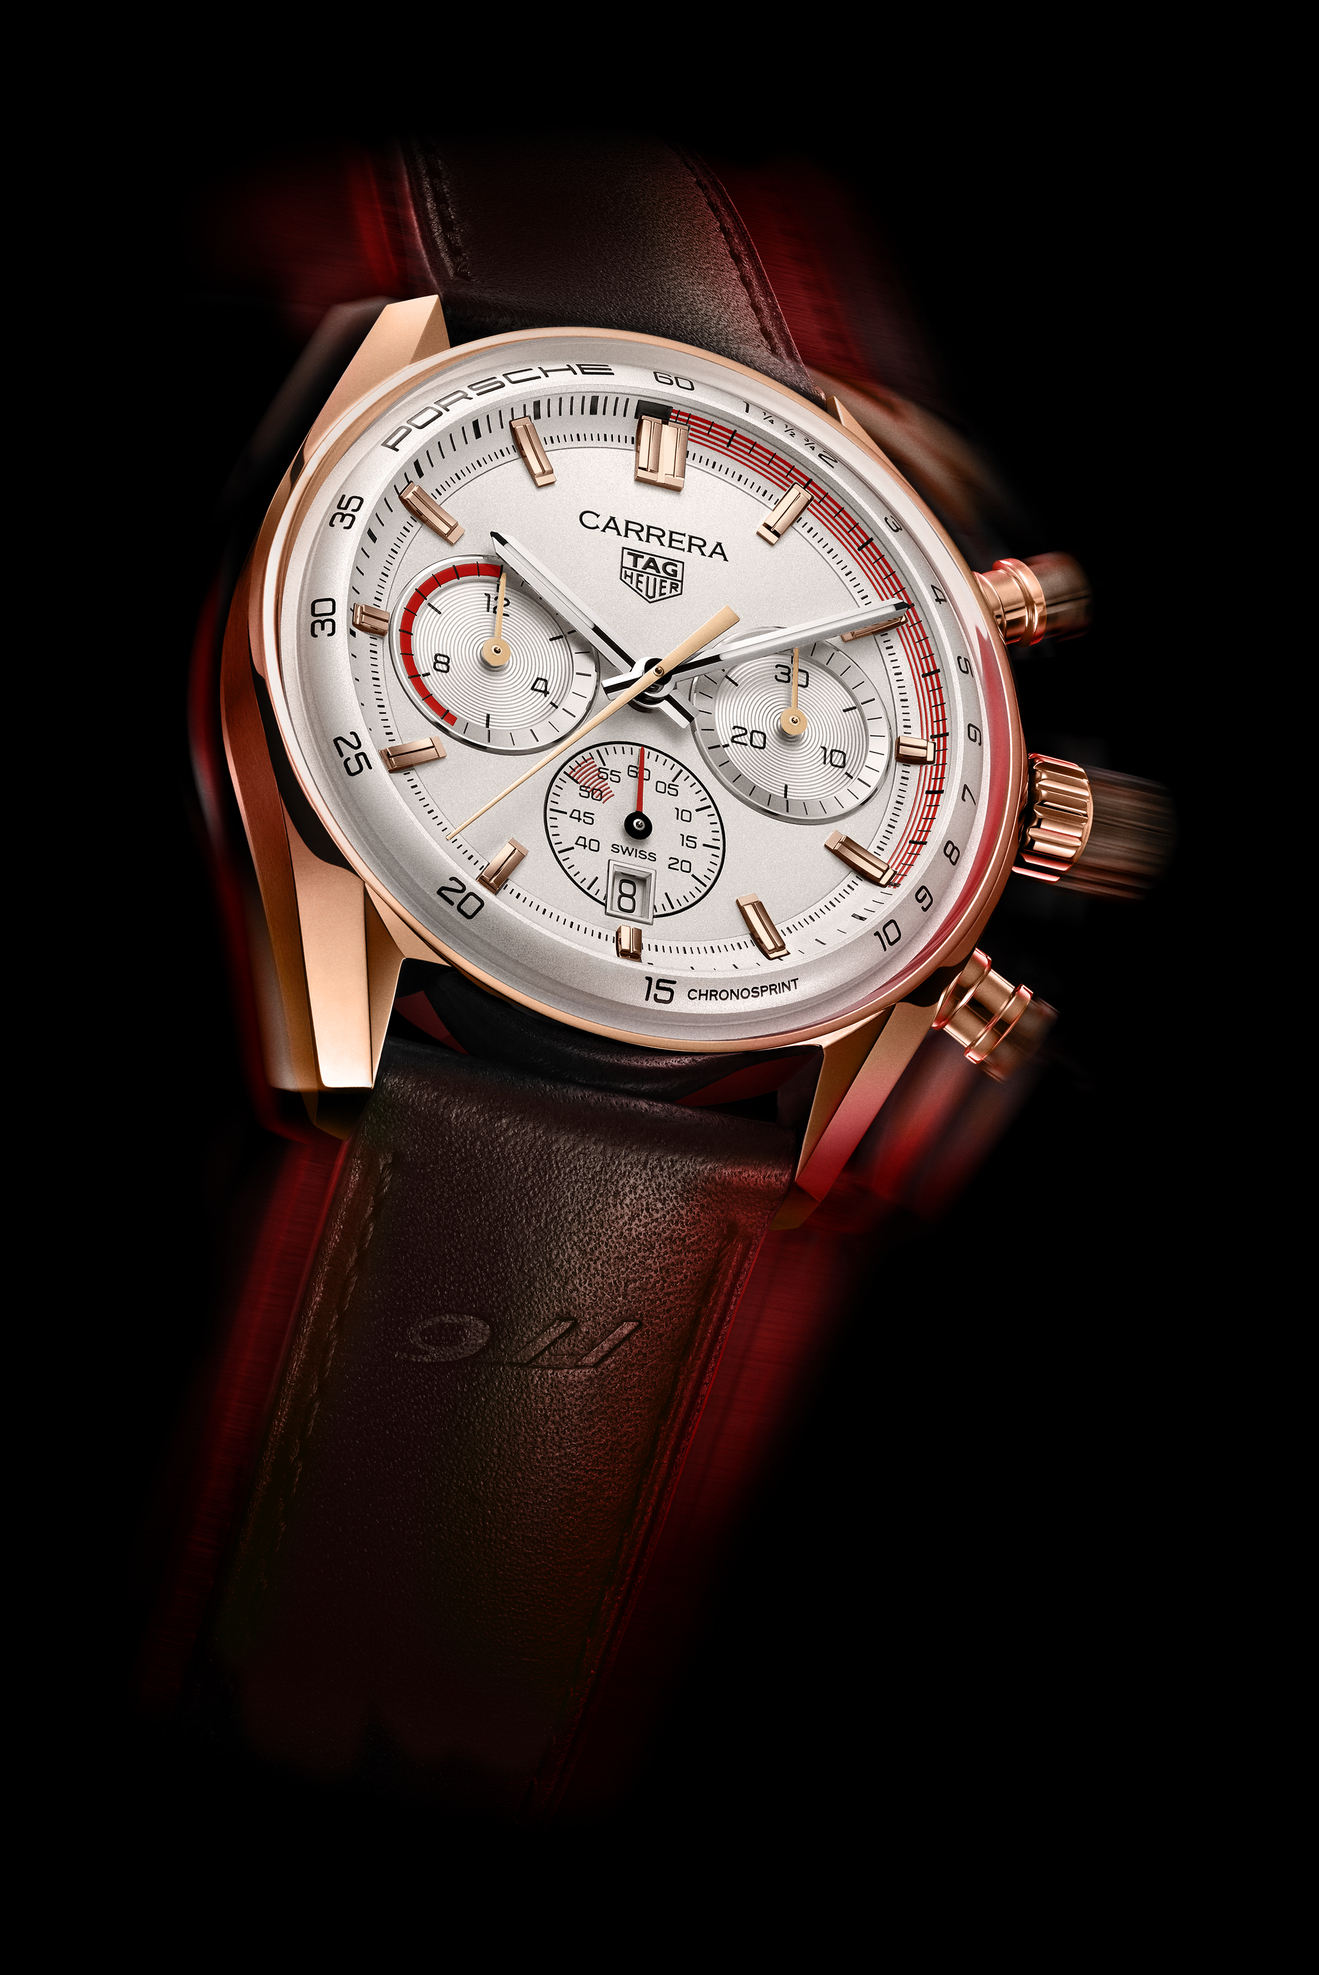 Porsche, TAG Heuer team up for Carrera Chronograph honoring the 911, a ...